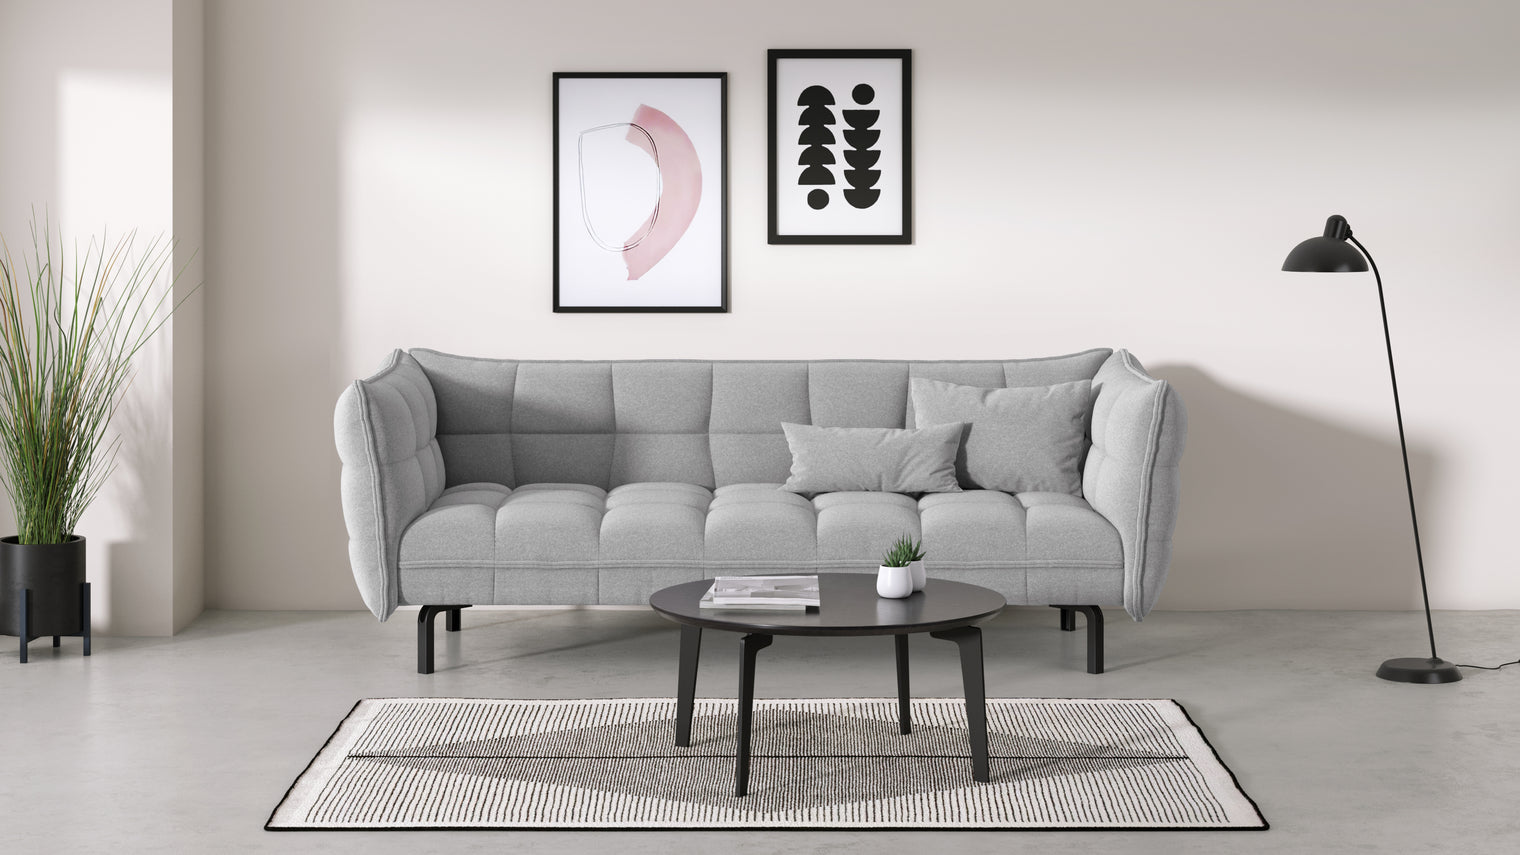 A COZY RETREAT | Created as a sheltered nook for relaxation with an elegant aesthetic appeal, the Skal Sofa brings together enveloping and soft shapes for a unique design that sits well with both classic and modern interior styles.
